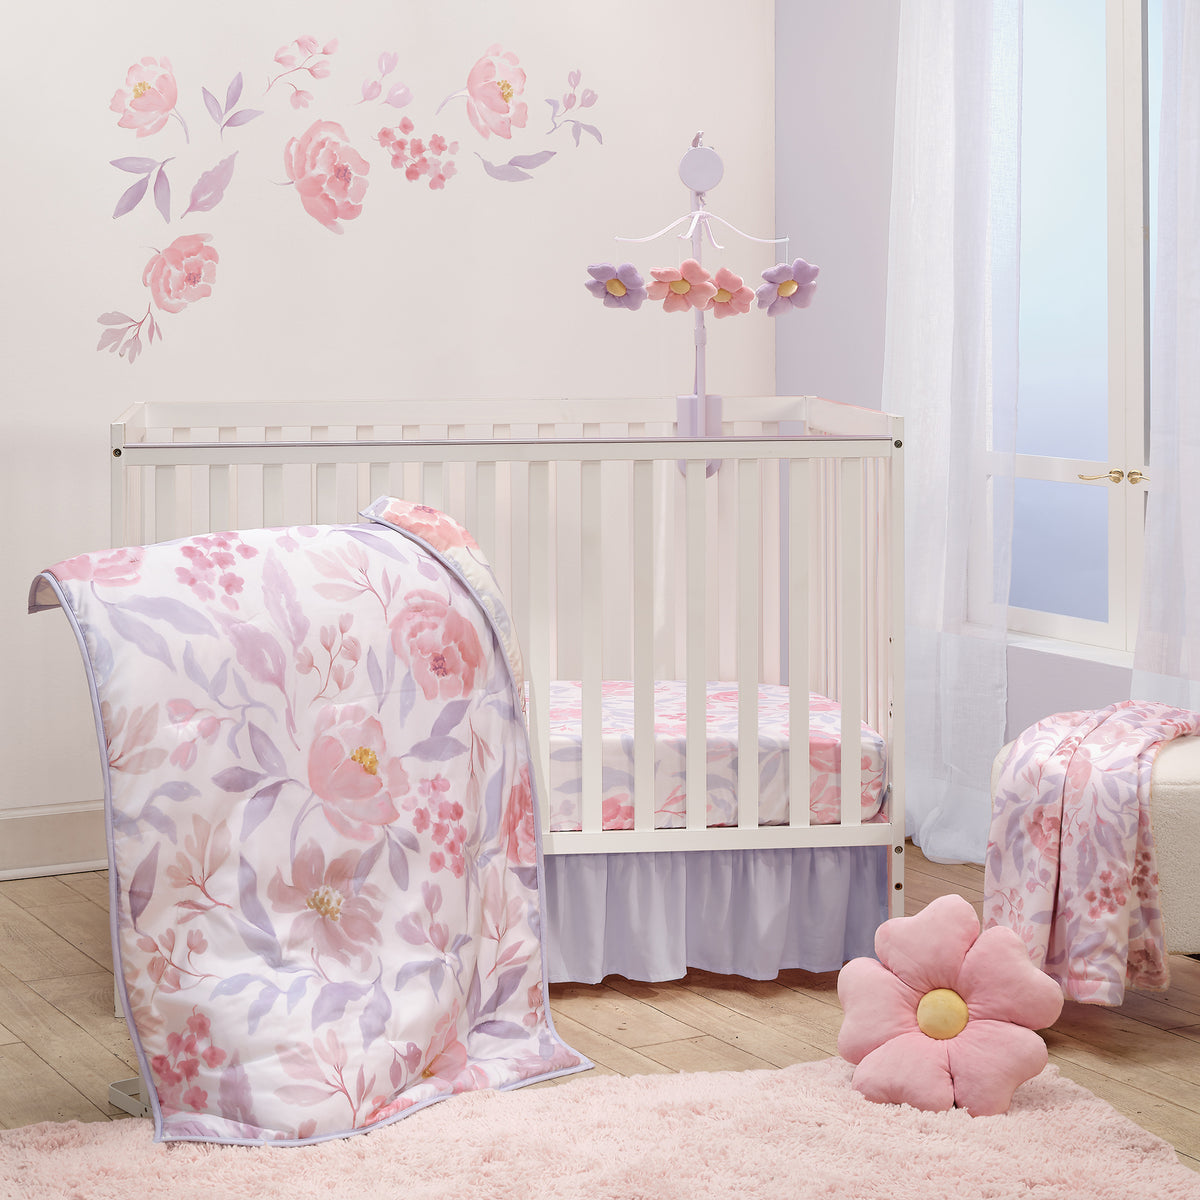 Lavender Floral Cotton Baby Set Back With Lining Perfect For Summer From  Dao07, $22.14